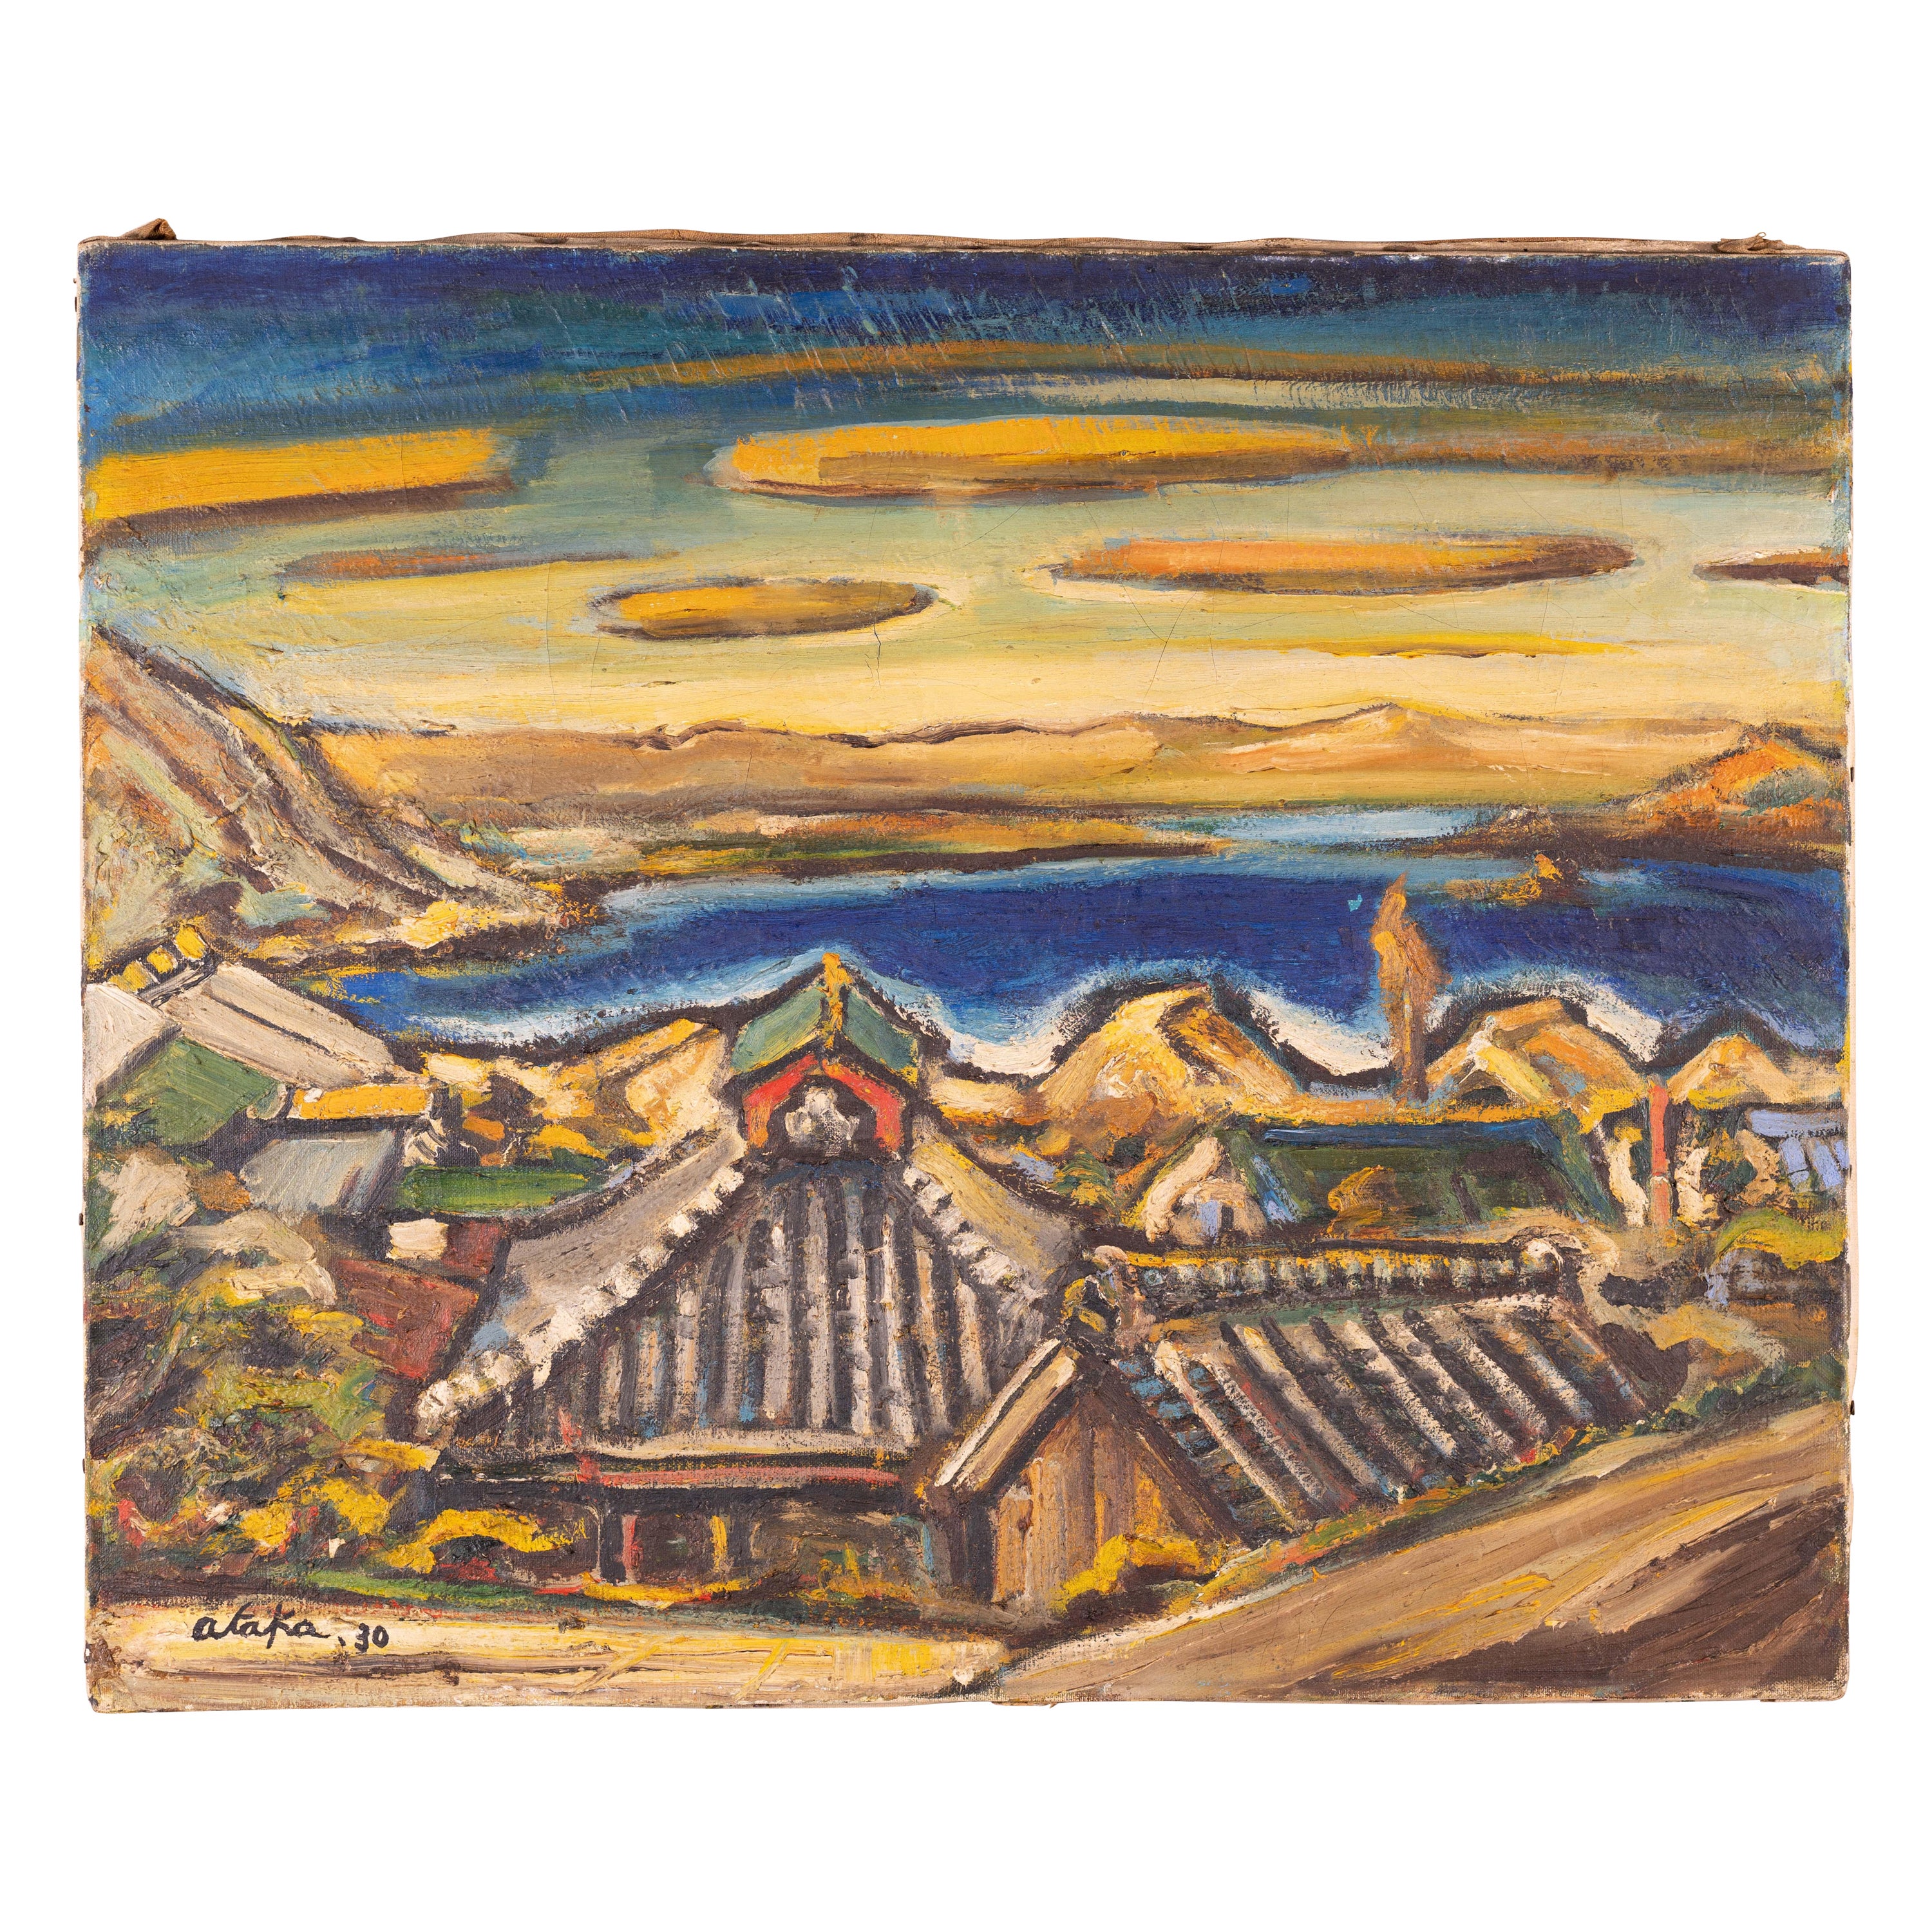 Japanese Modernist Painting of a Seaside Village by Torao Ataka Dated 1930 For Sale